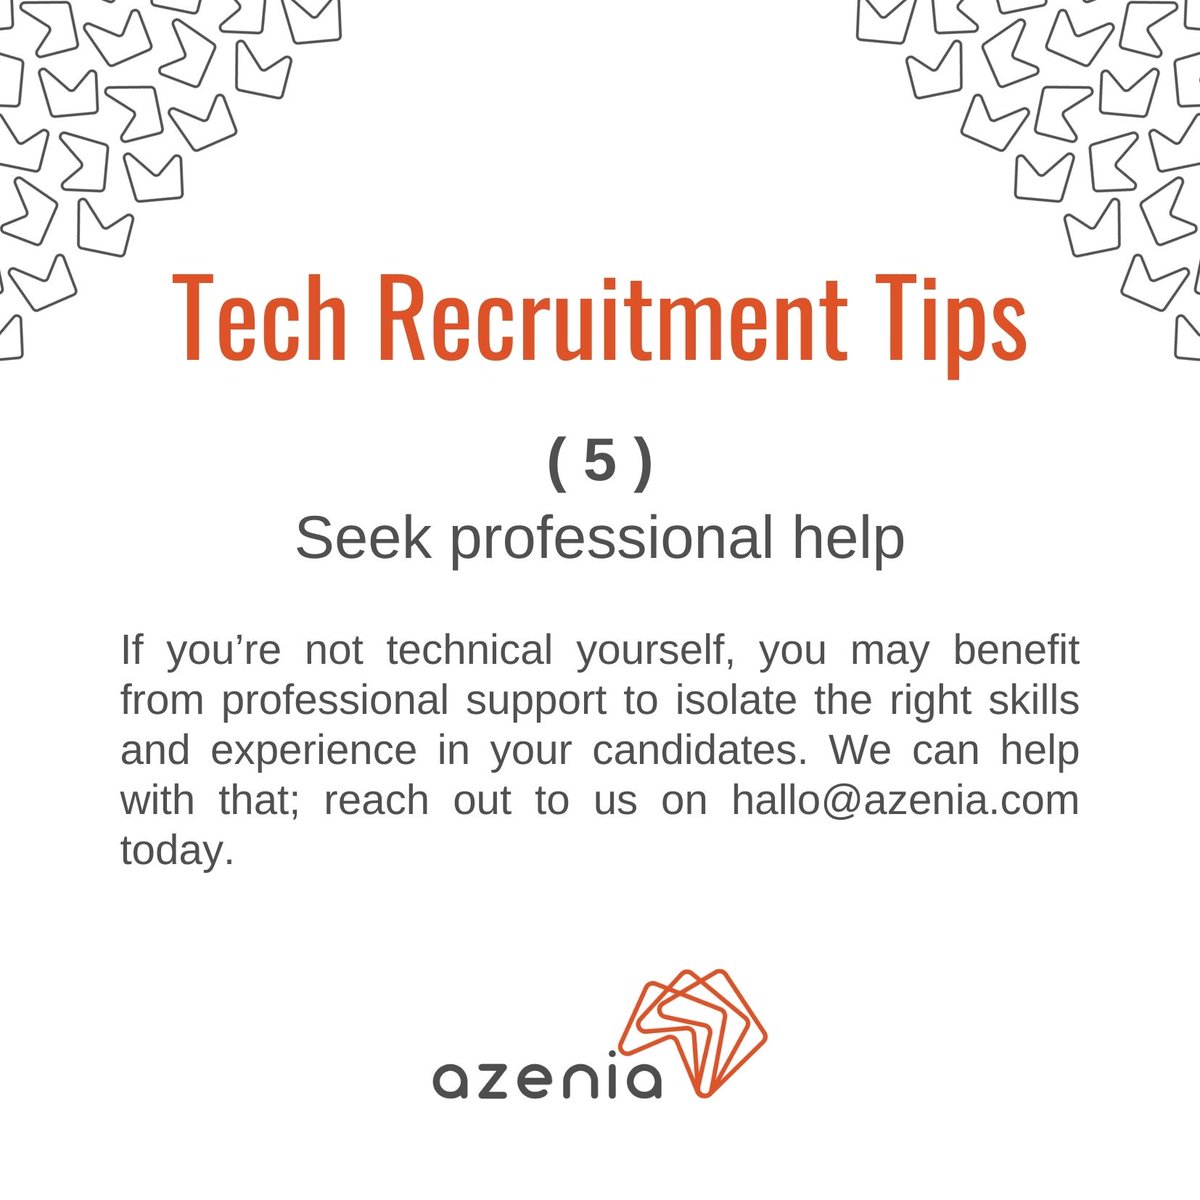 Don't let the lack of technical expertise hold you back from hiring top tech talent. Here's our final tip to make the process easier and more efficient.
Need more support? We're here to help - reach out to us for professional guidance. #fintechhiring #techtalent #recruitmenttips